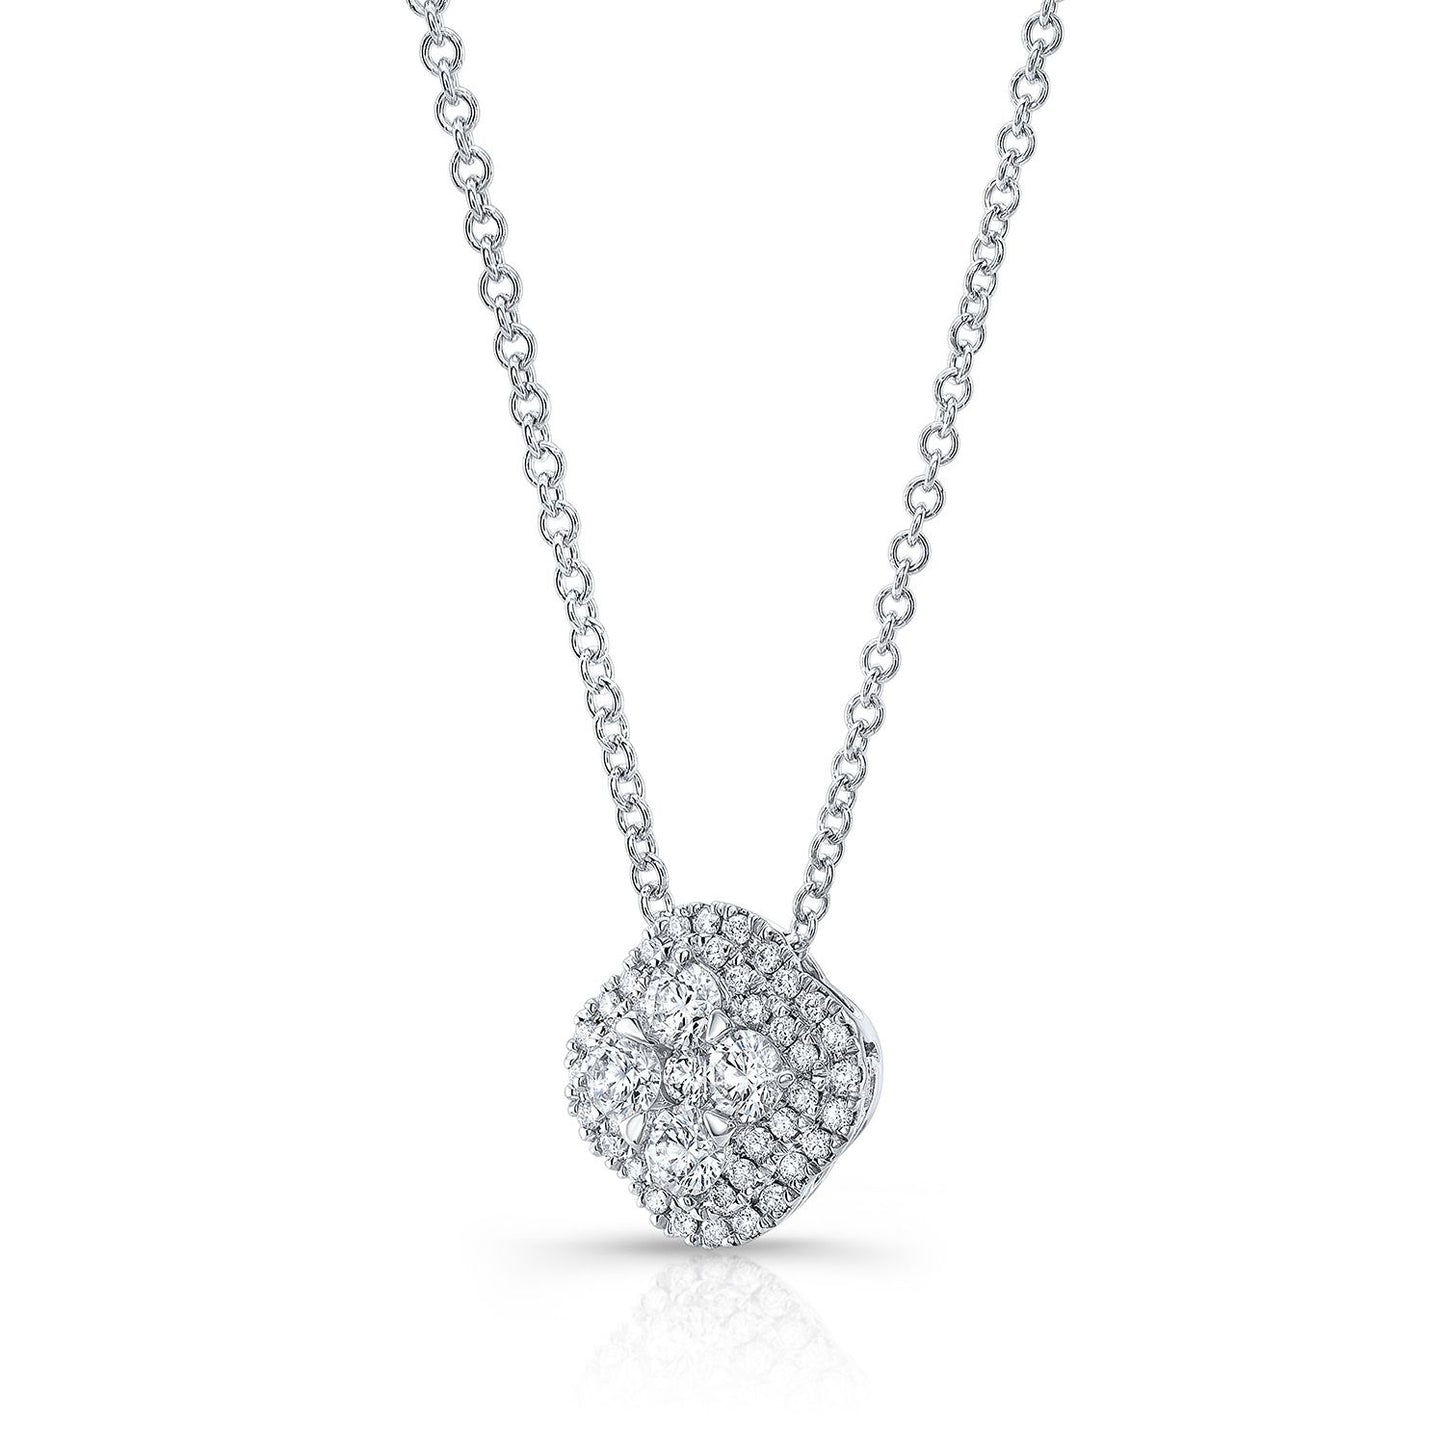 Diamond Clster And Cushion Shape Pendant With Micro-prong Set Border In 14k White Gold